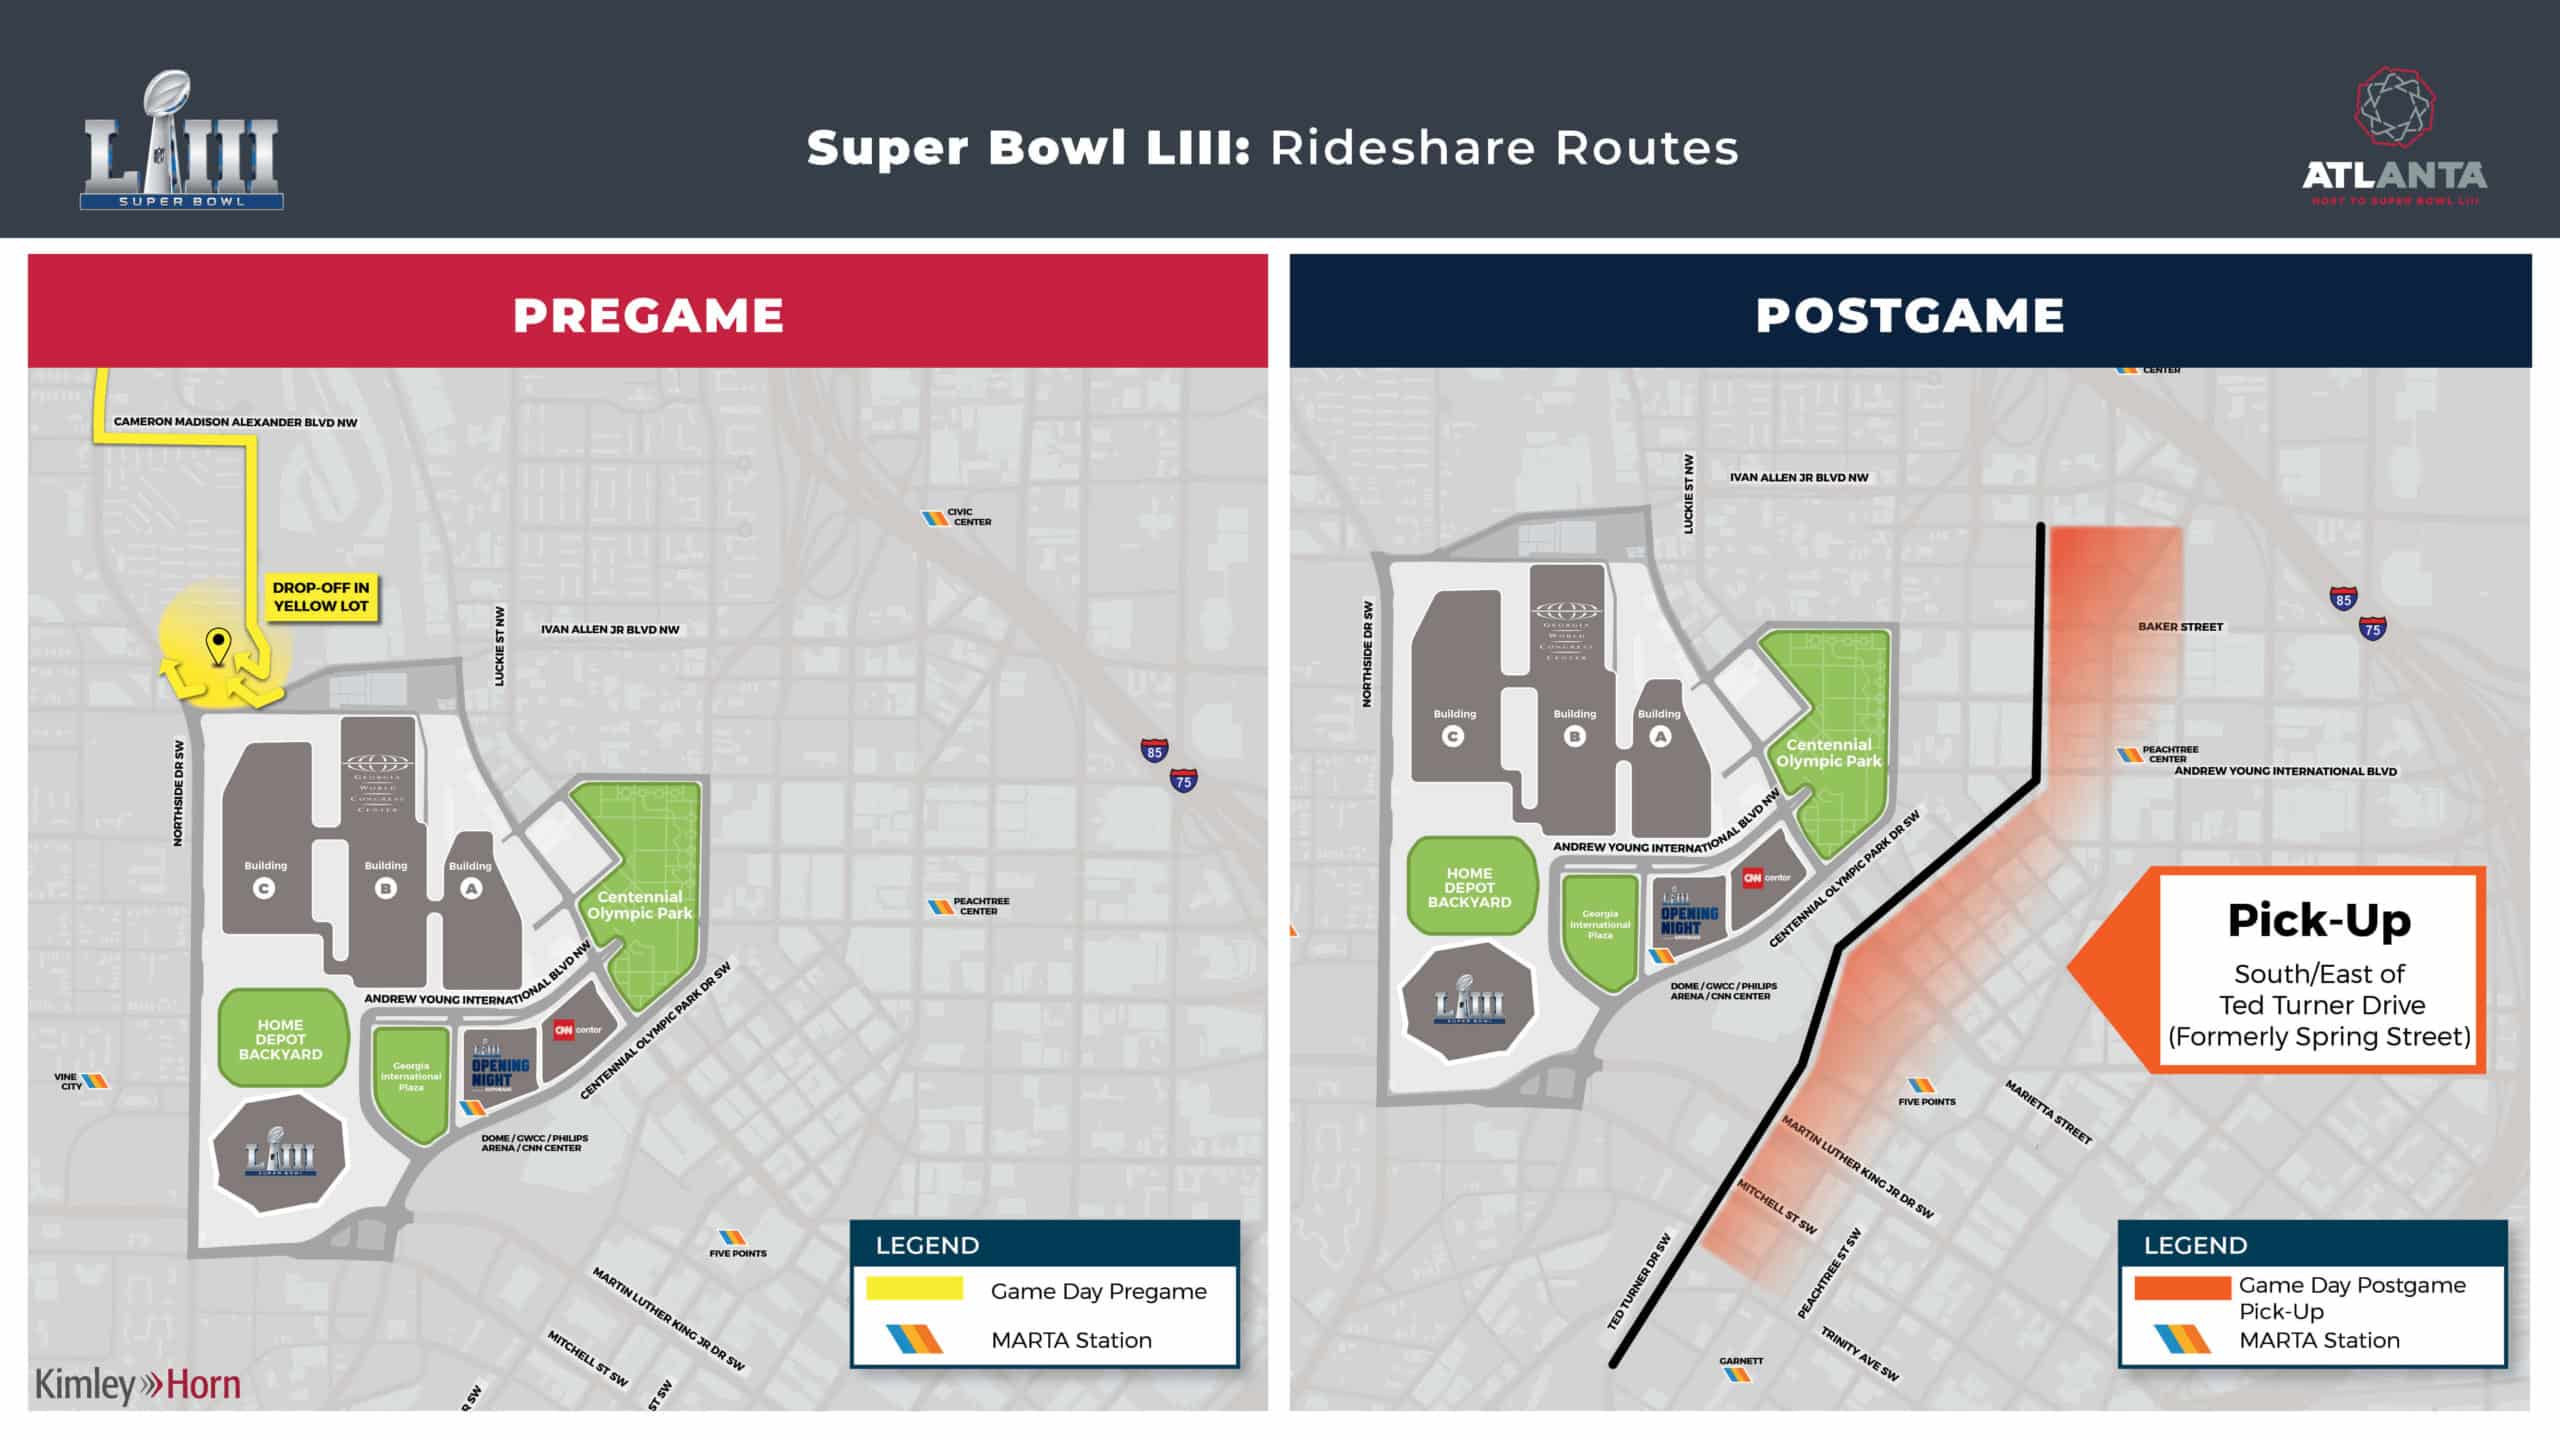 Kimley-Horn Super Bowl traffic management plan included know before you go rideshare route maps